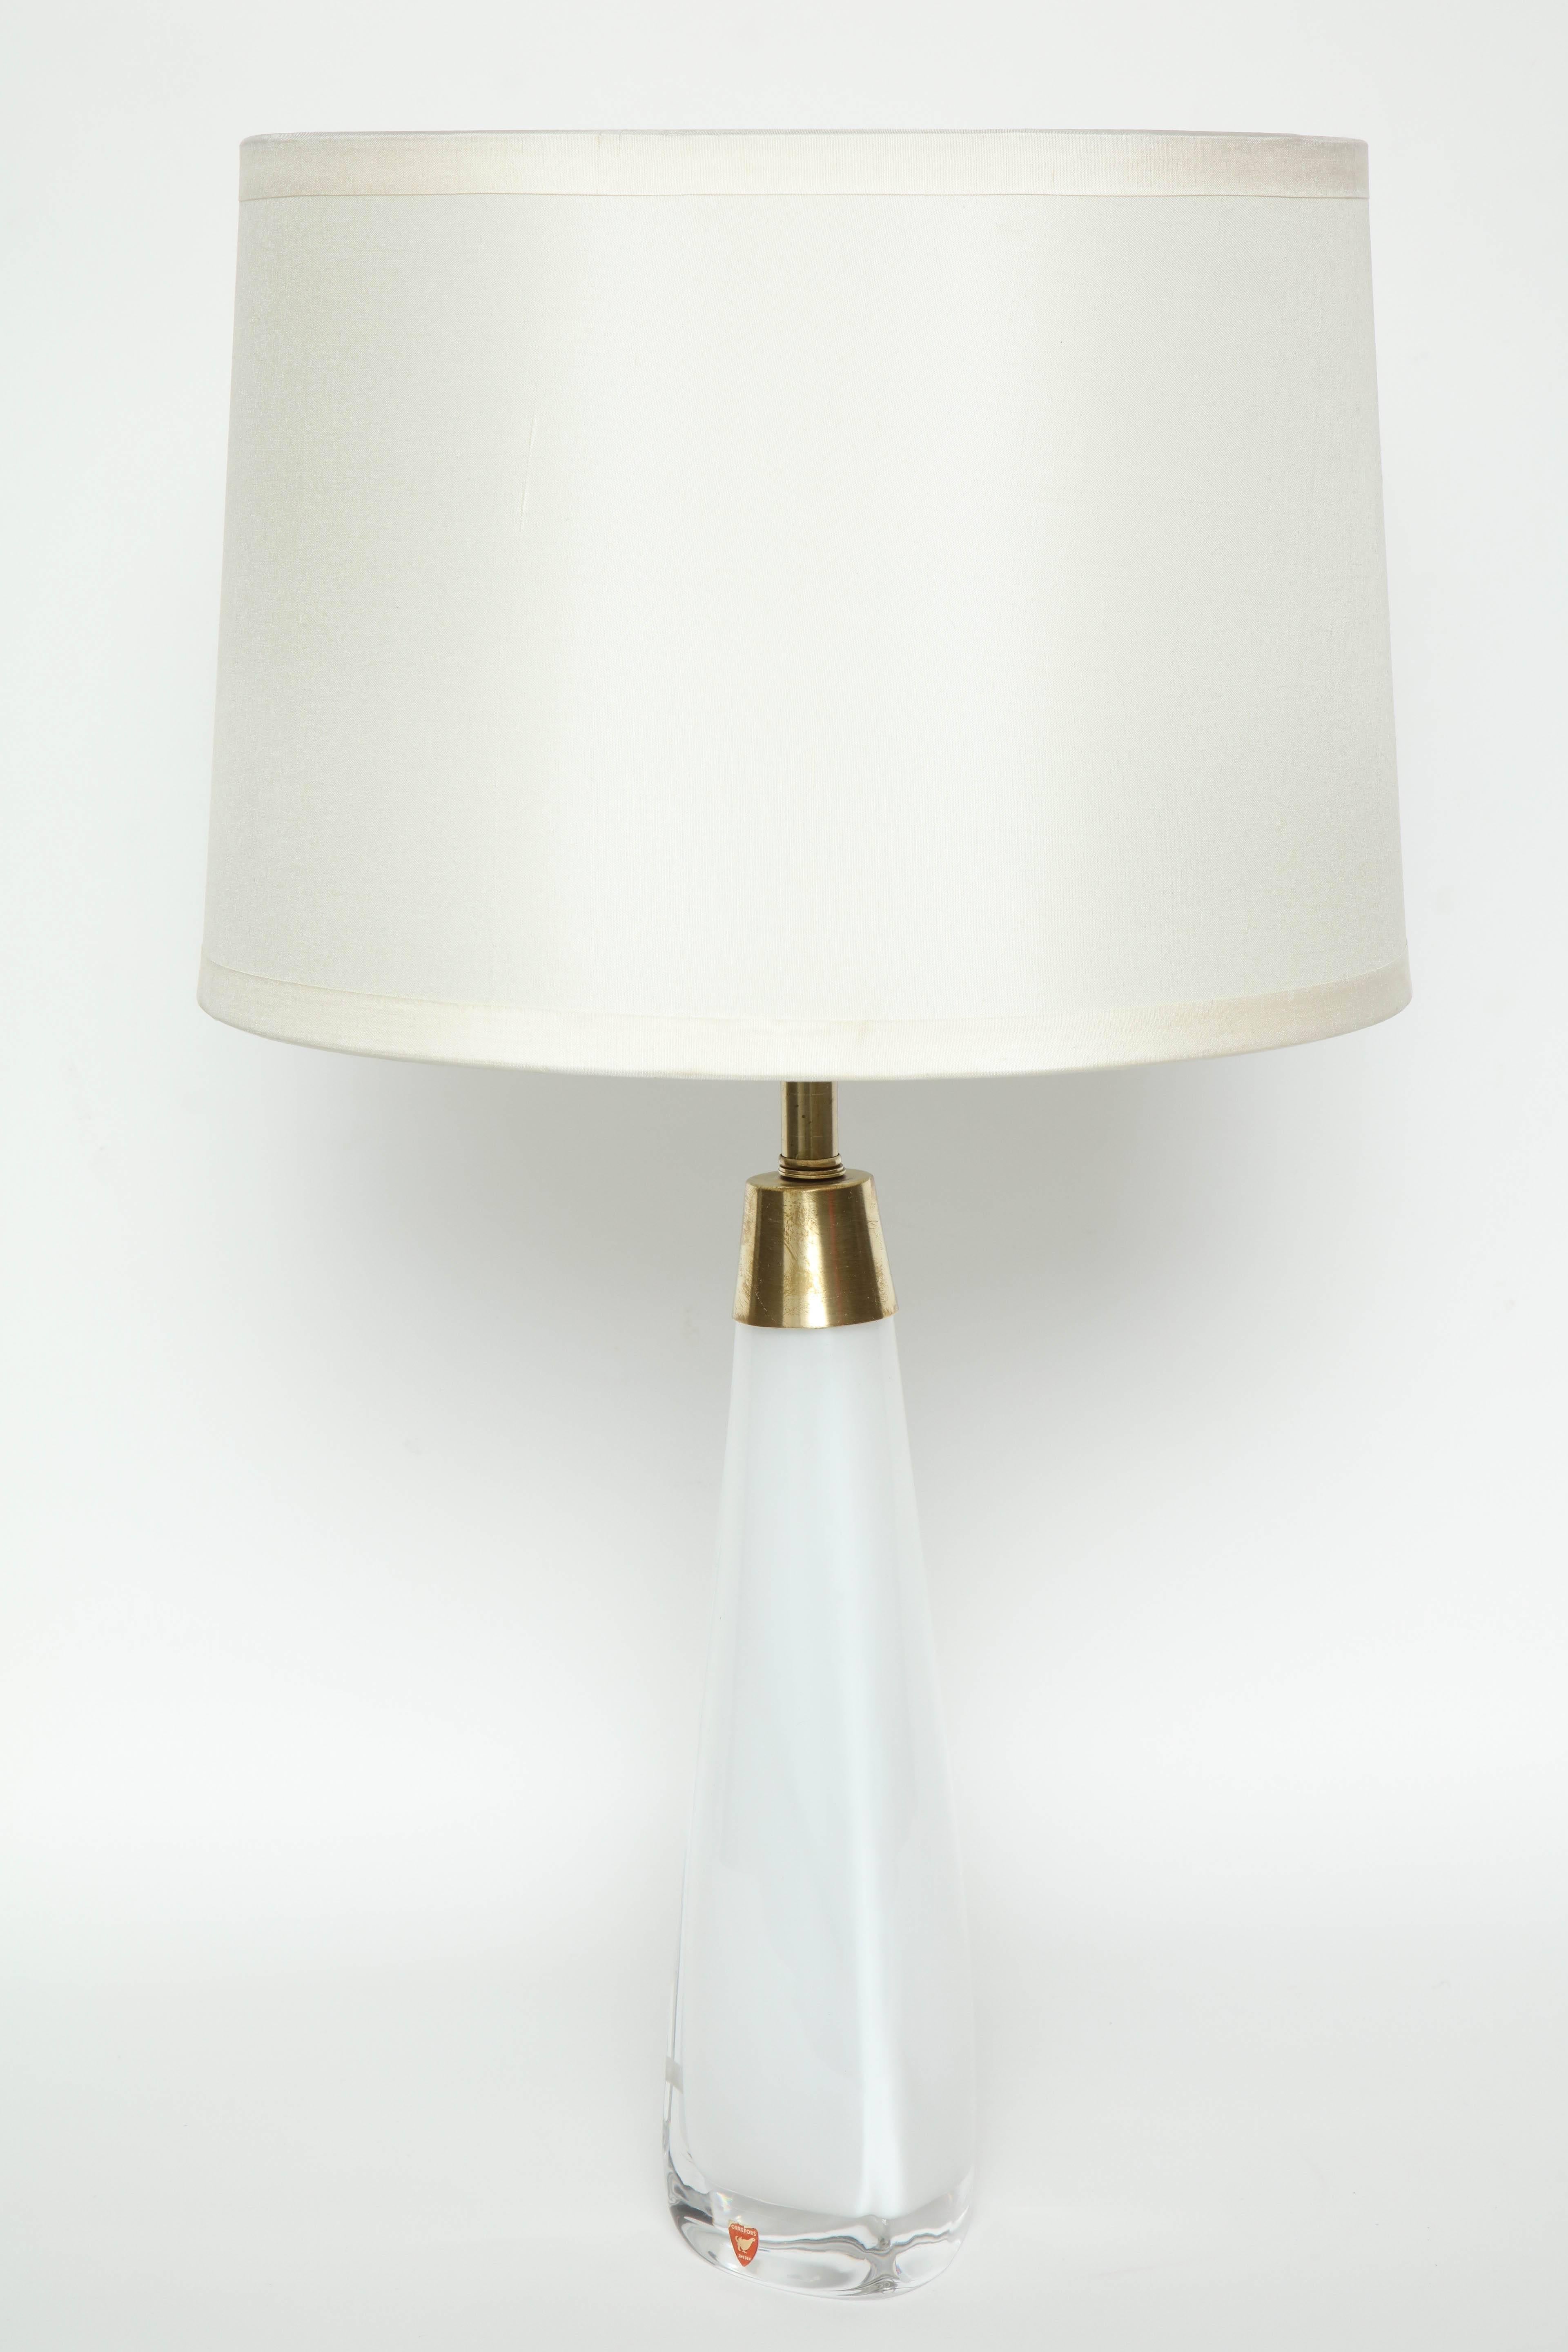 Nils Landberg for Orrefors White Crystal Lamps In Excellent Condition In New York, NY